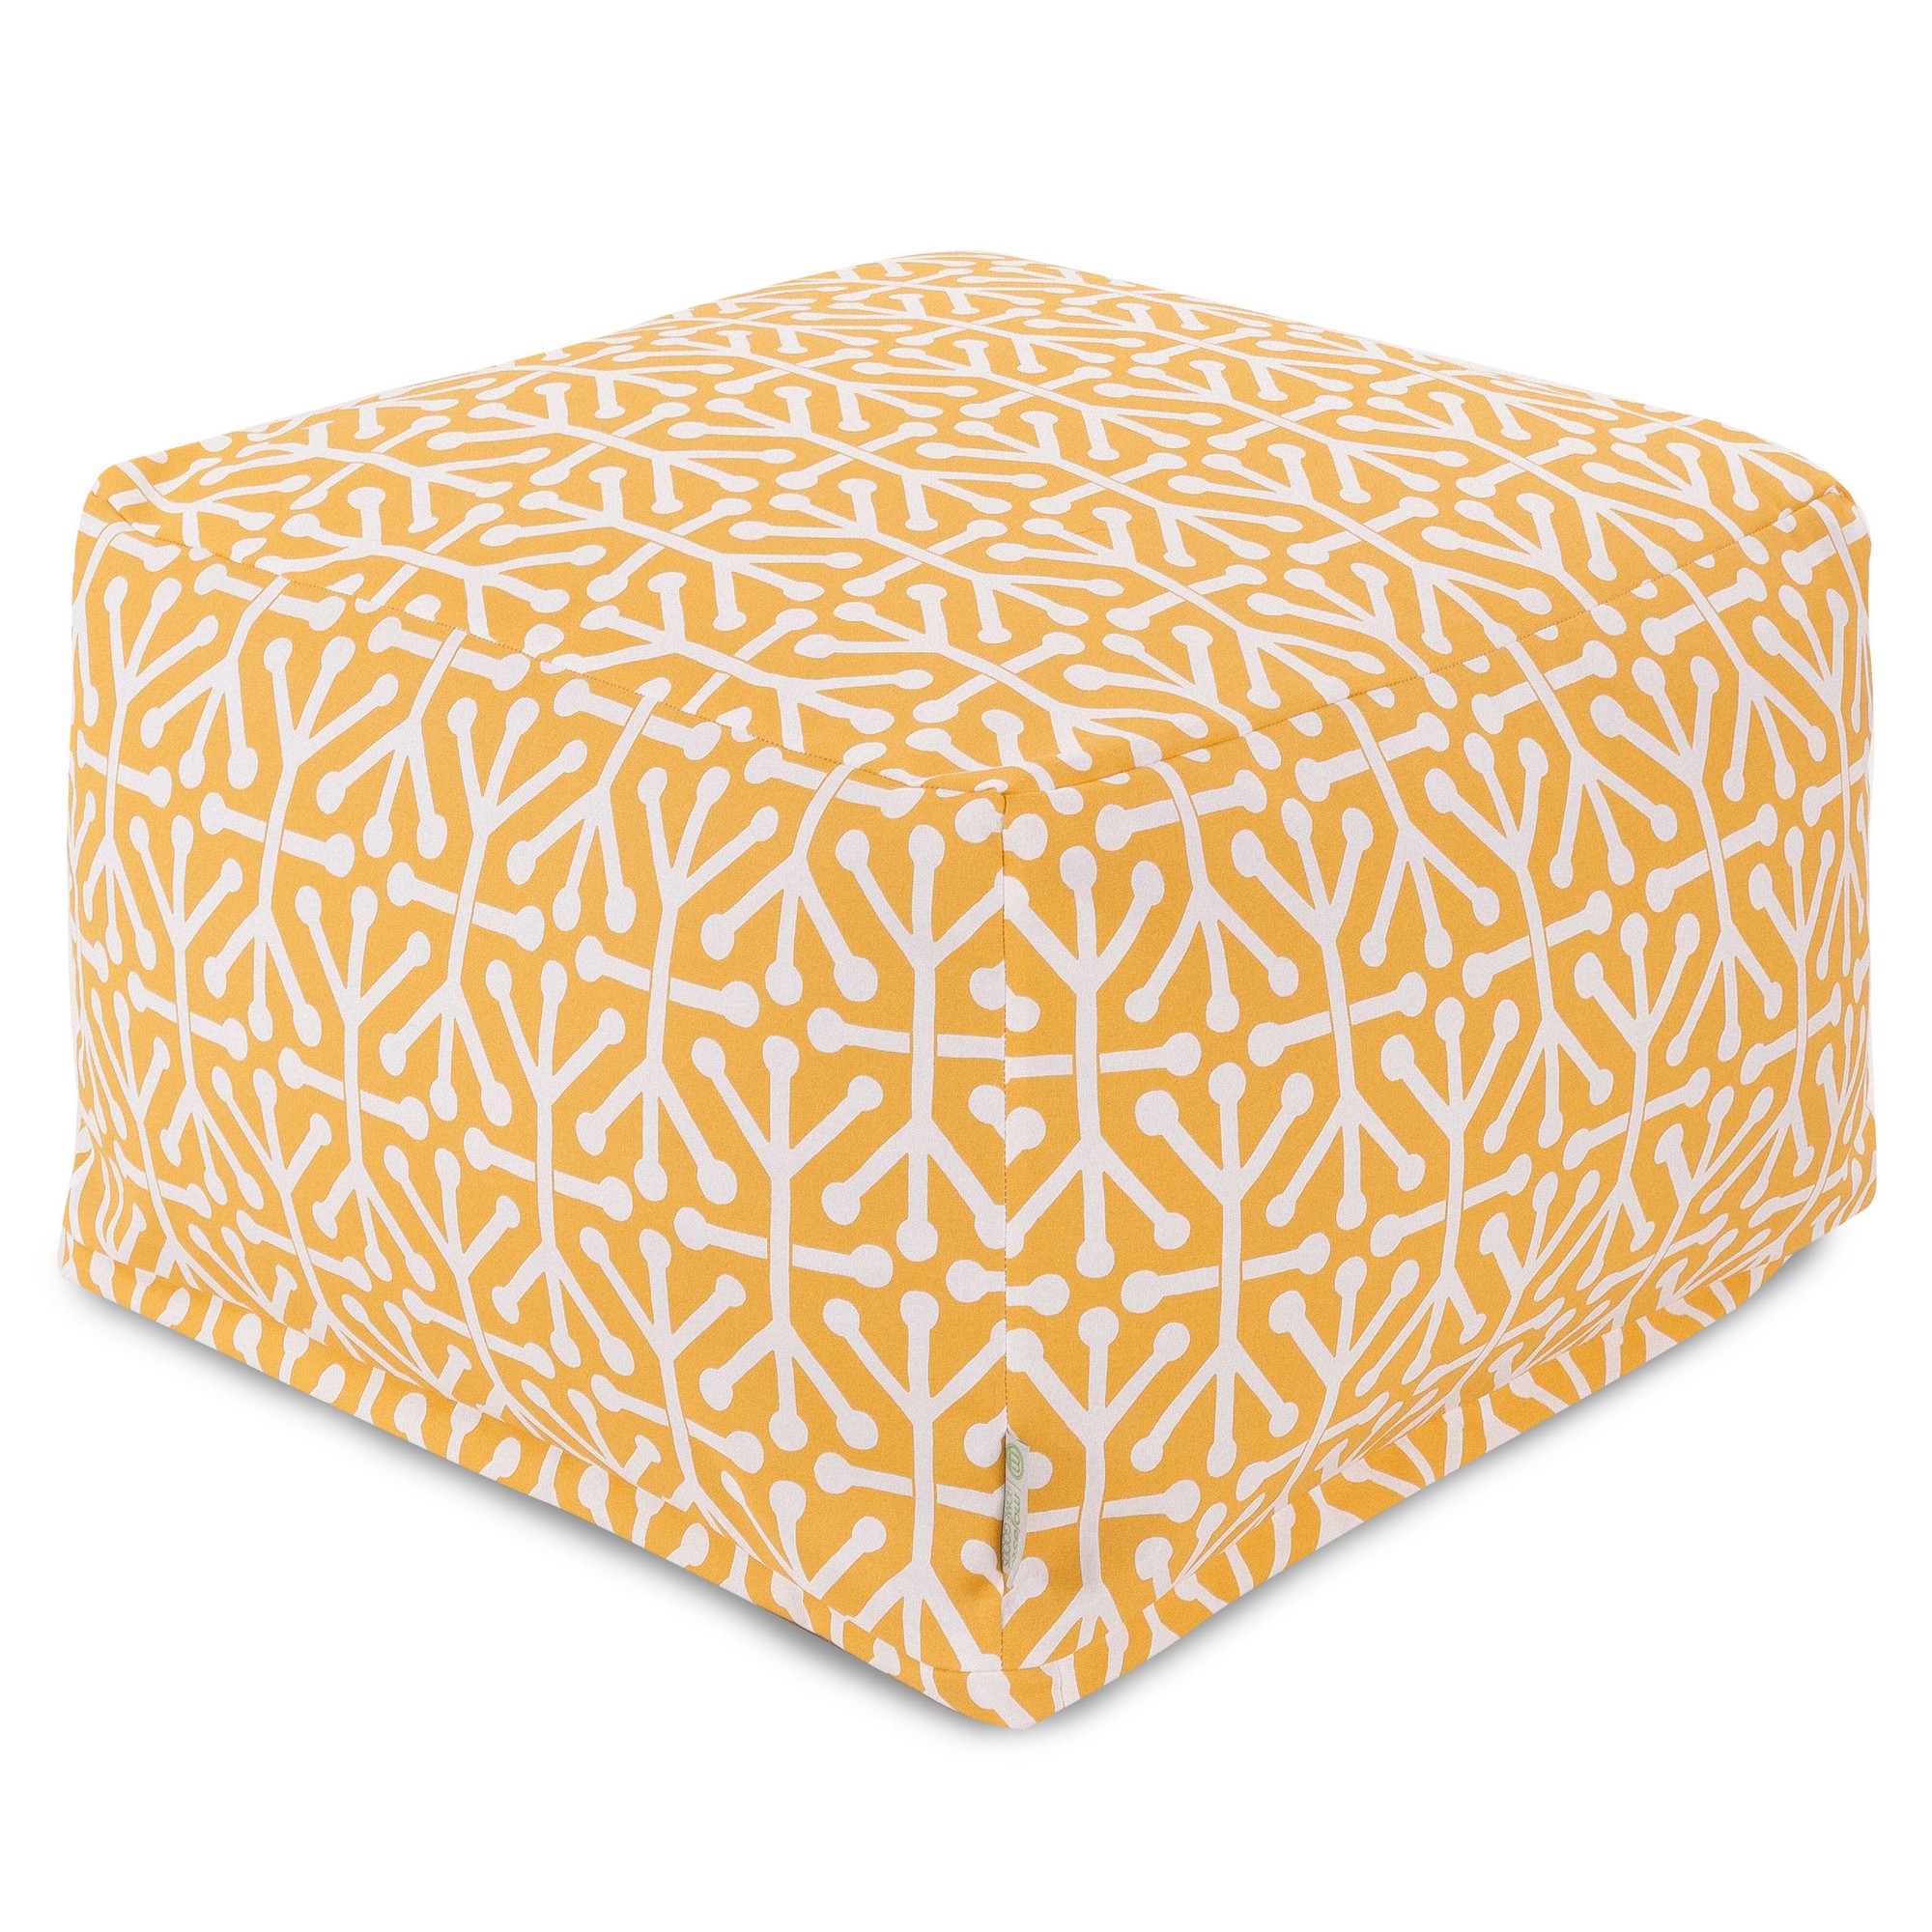 Majestic Home Goods Indoor Outdoor Aruba Ottoman Pouf 27 in L x 27 in W x 17 in H - image 1 of 6